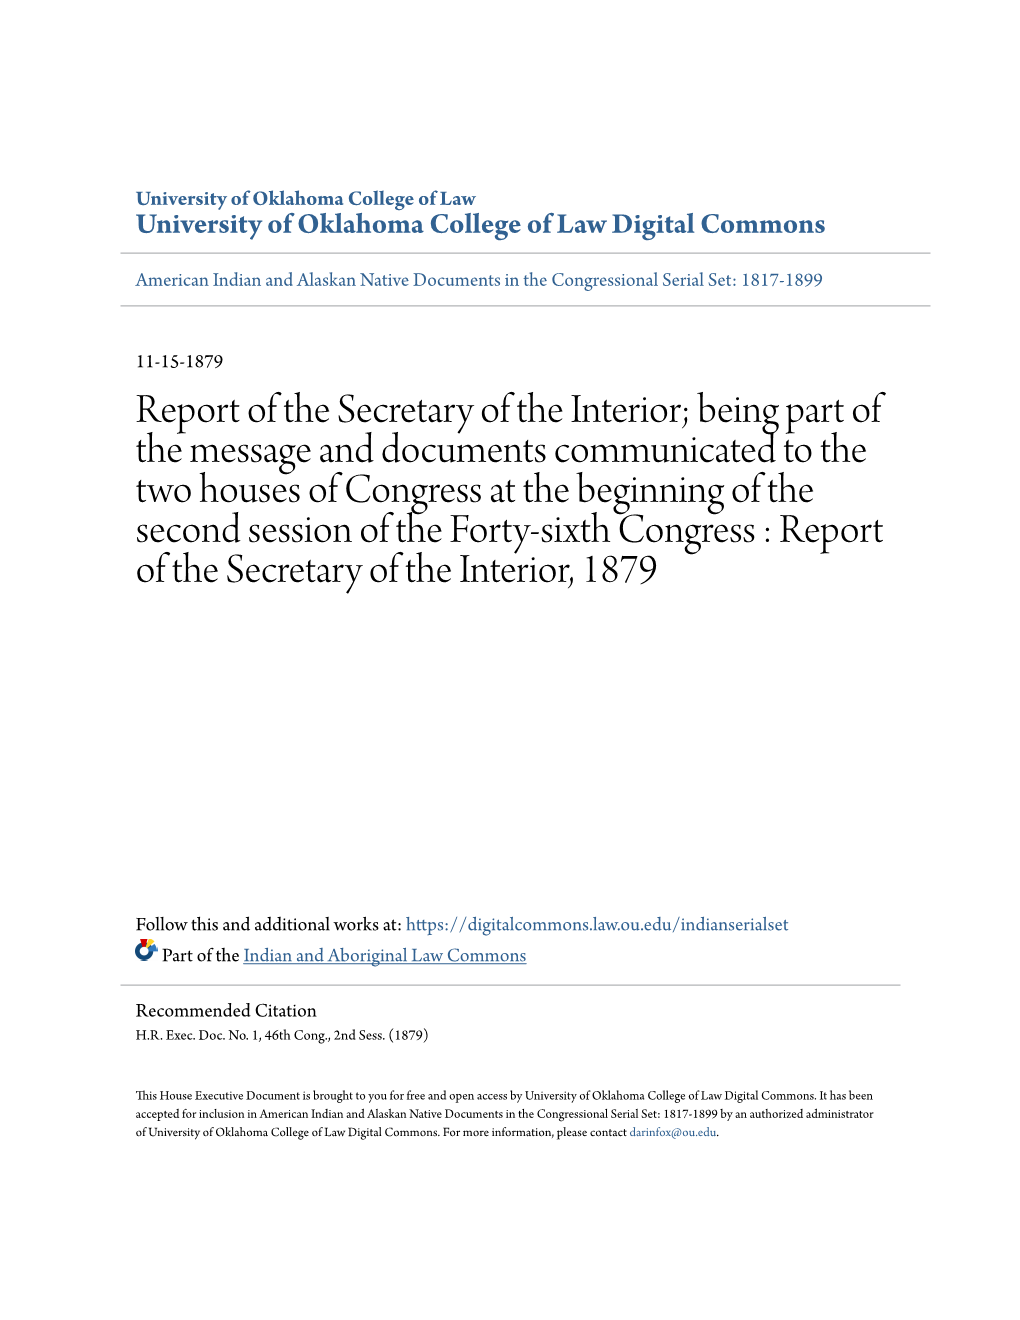 Report of the Secretary of the Interior; Being Part of the Message and Documents Communicated to the Two Houses of Congress at T